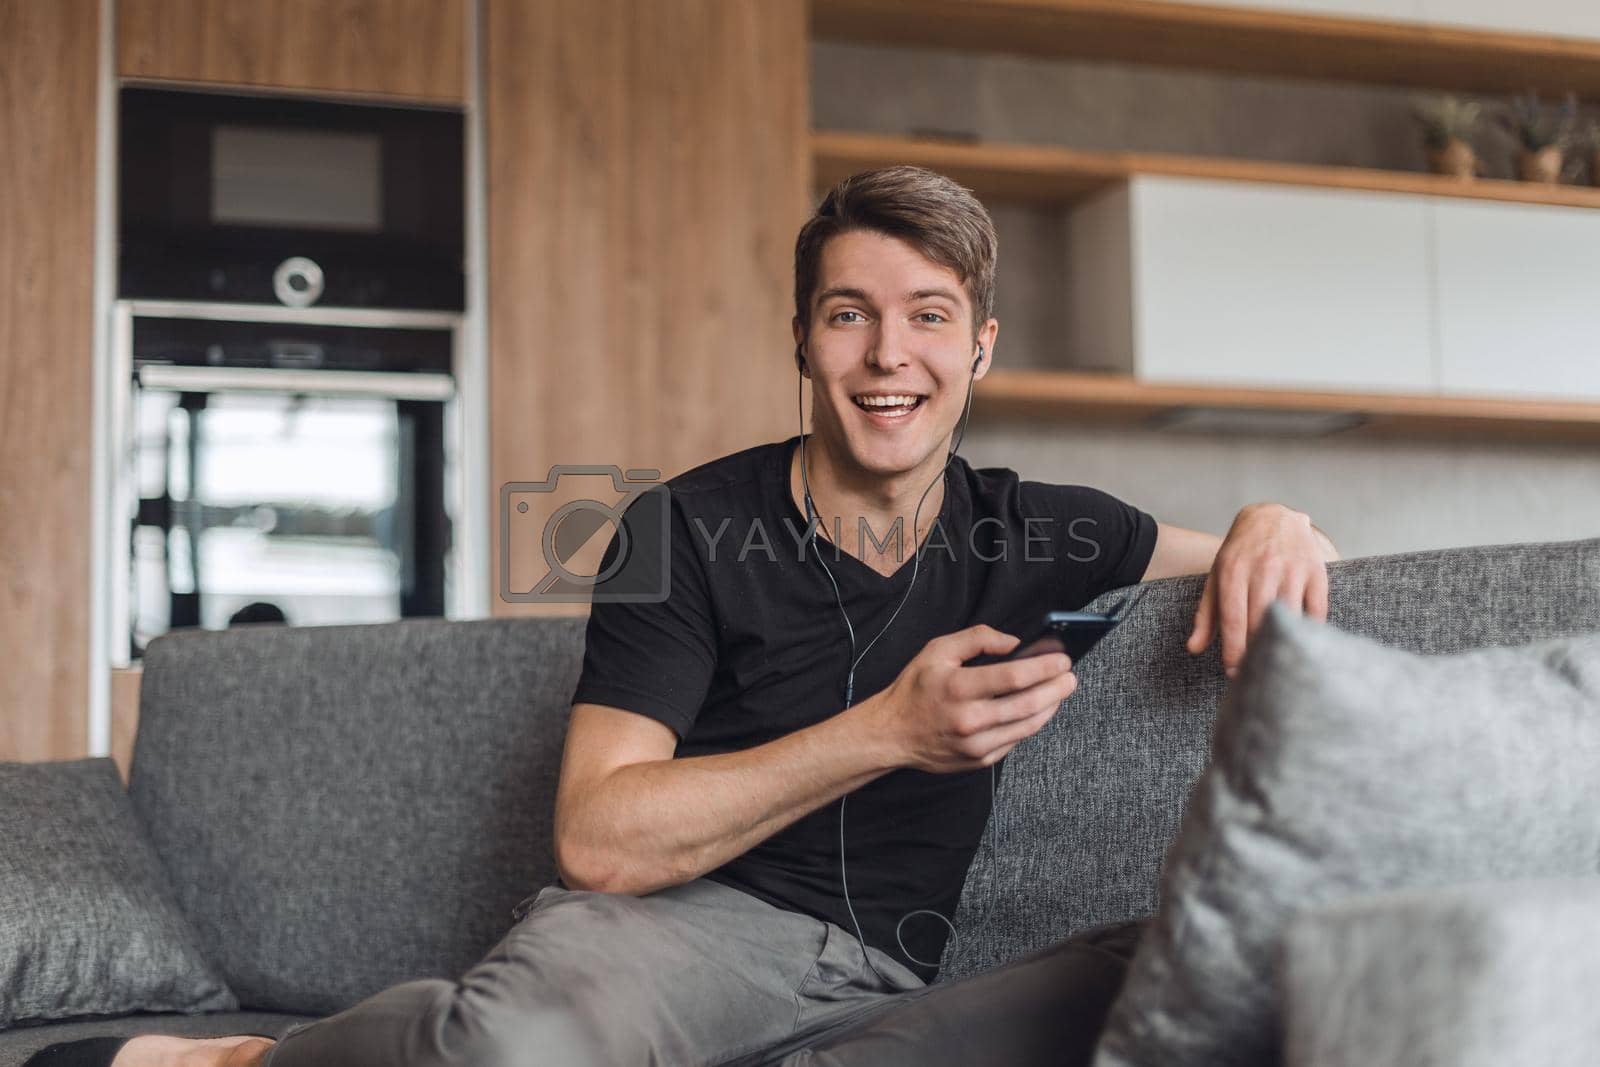 Royalty free image of happy guy listening to fun music through headphones by asdf